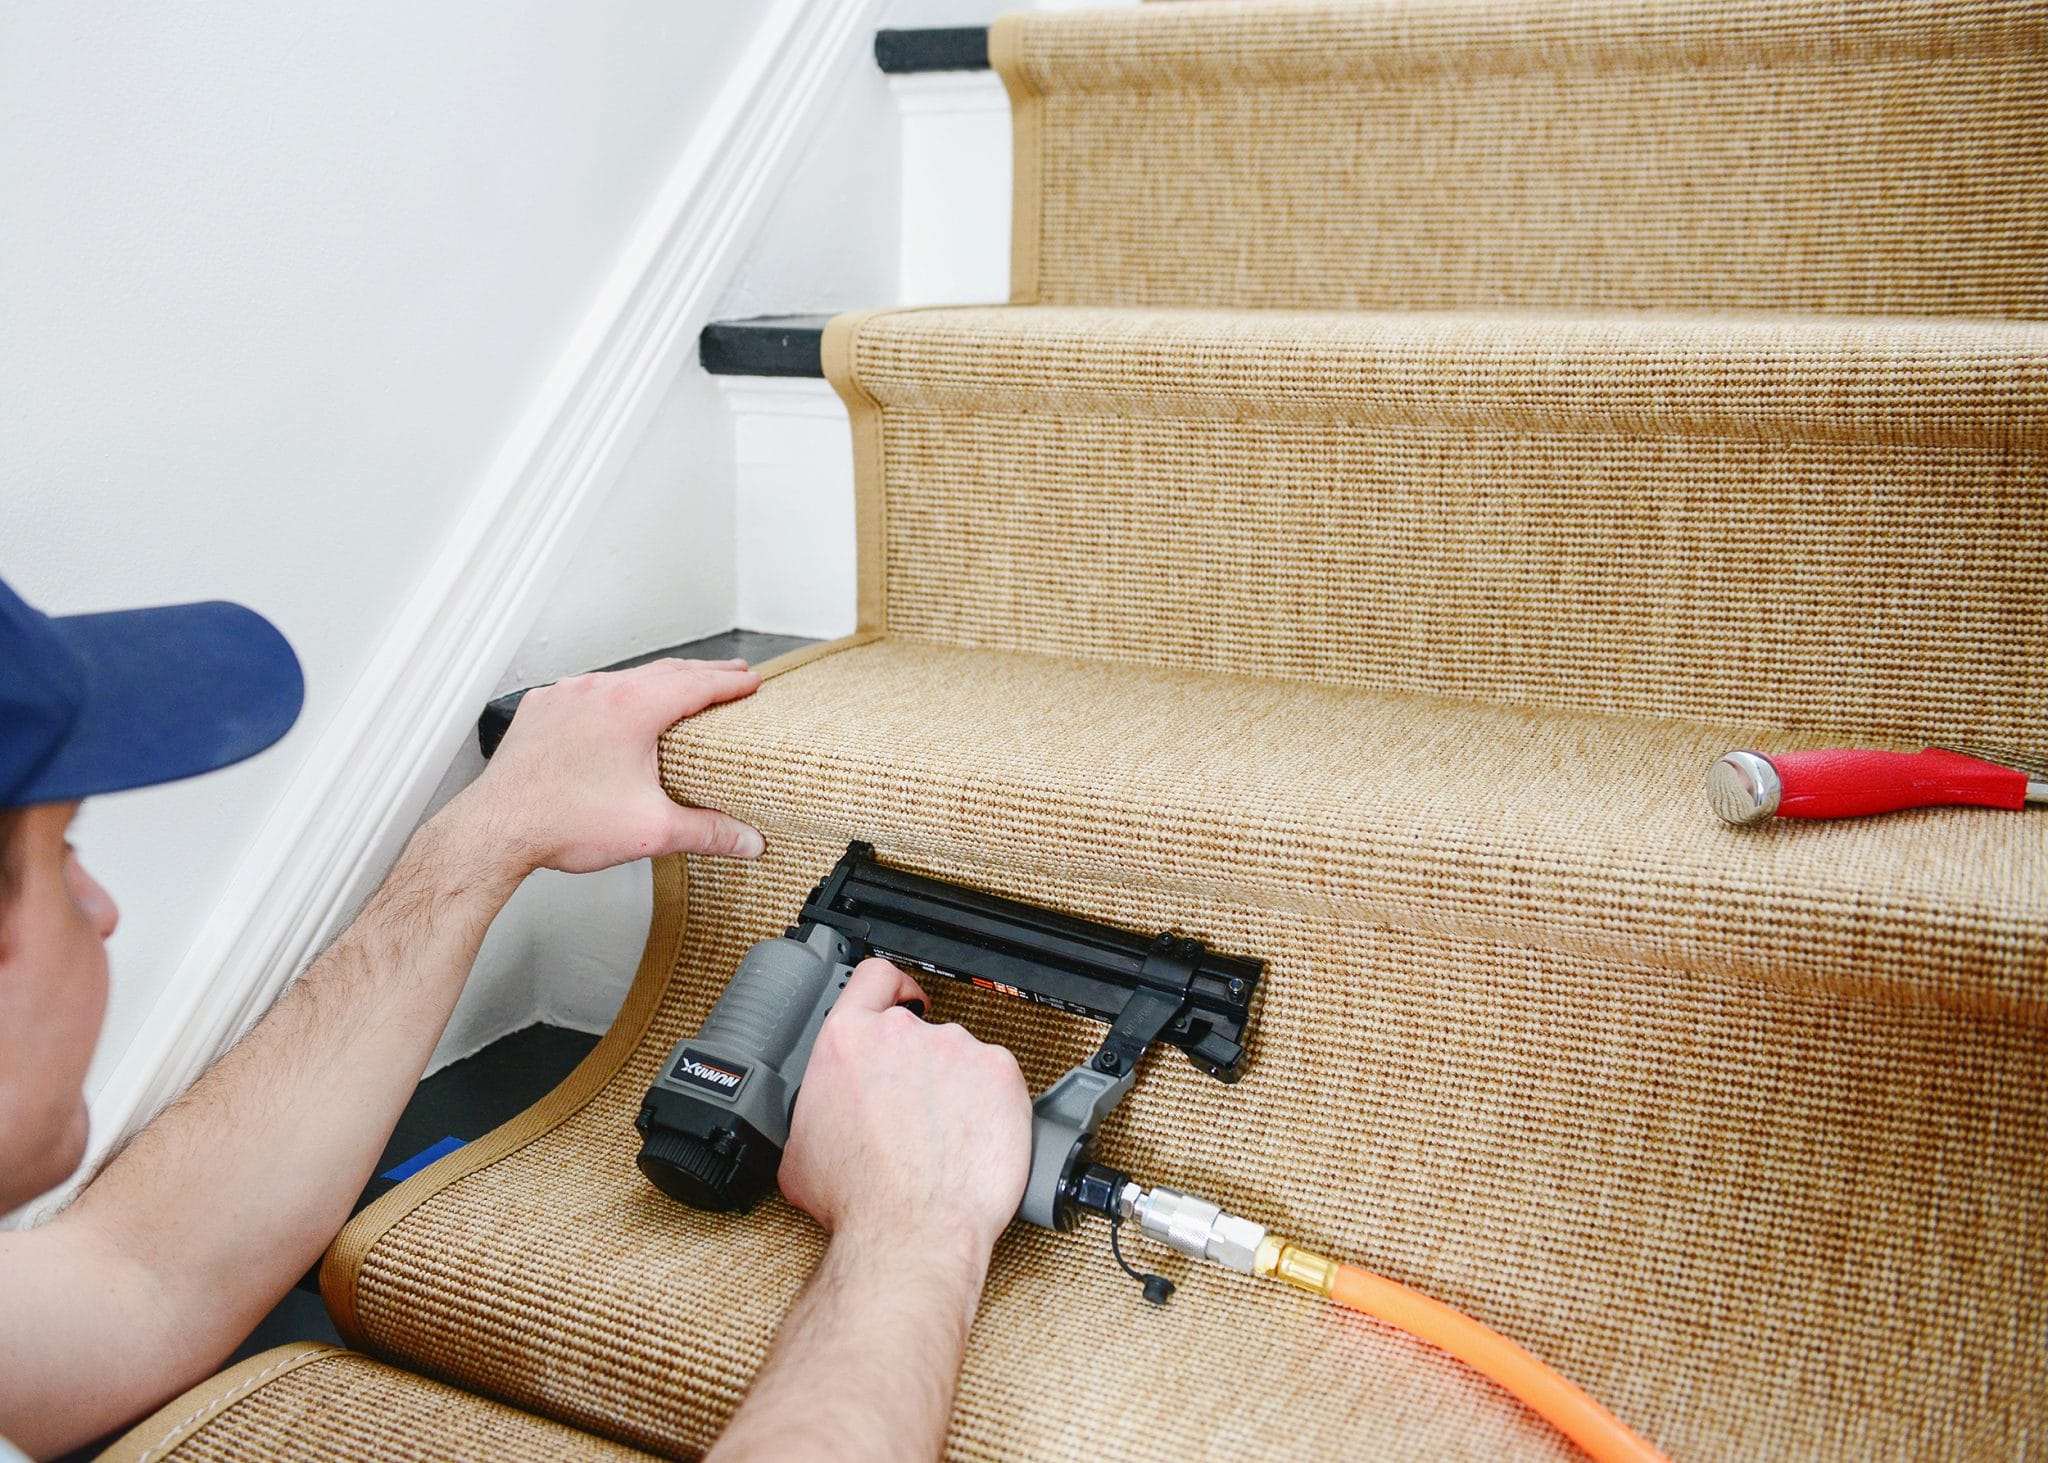 Using the stapler to install a stair runner | How to Install a Stair Runner in 10 Steps via Yellow Brick Home